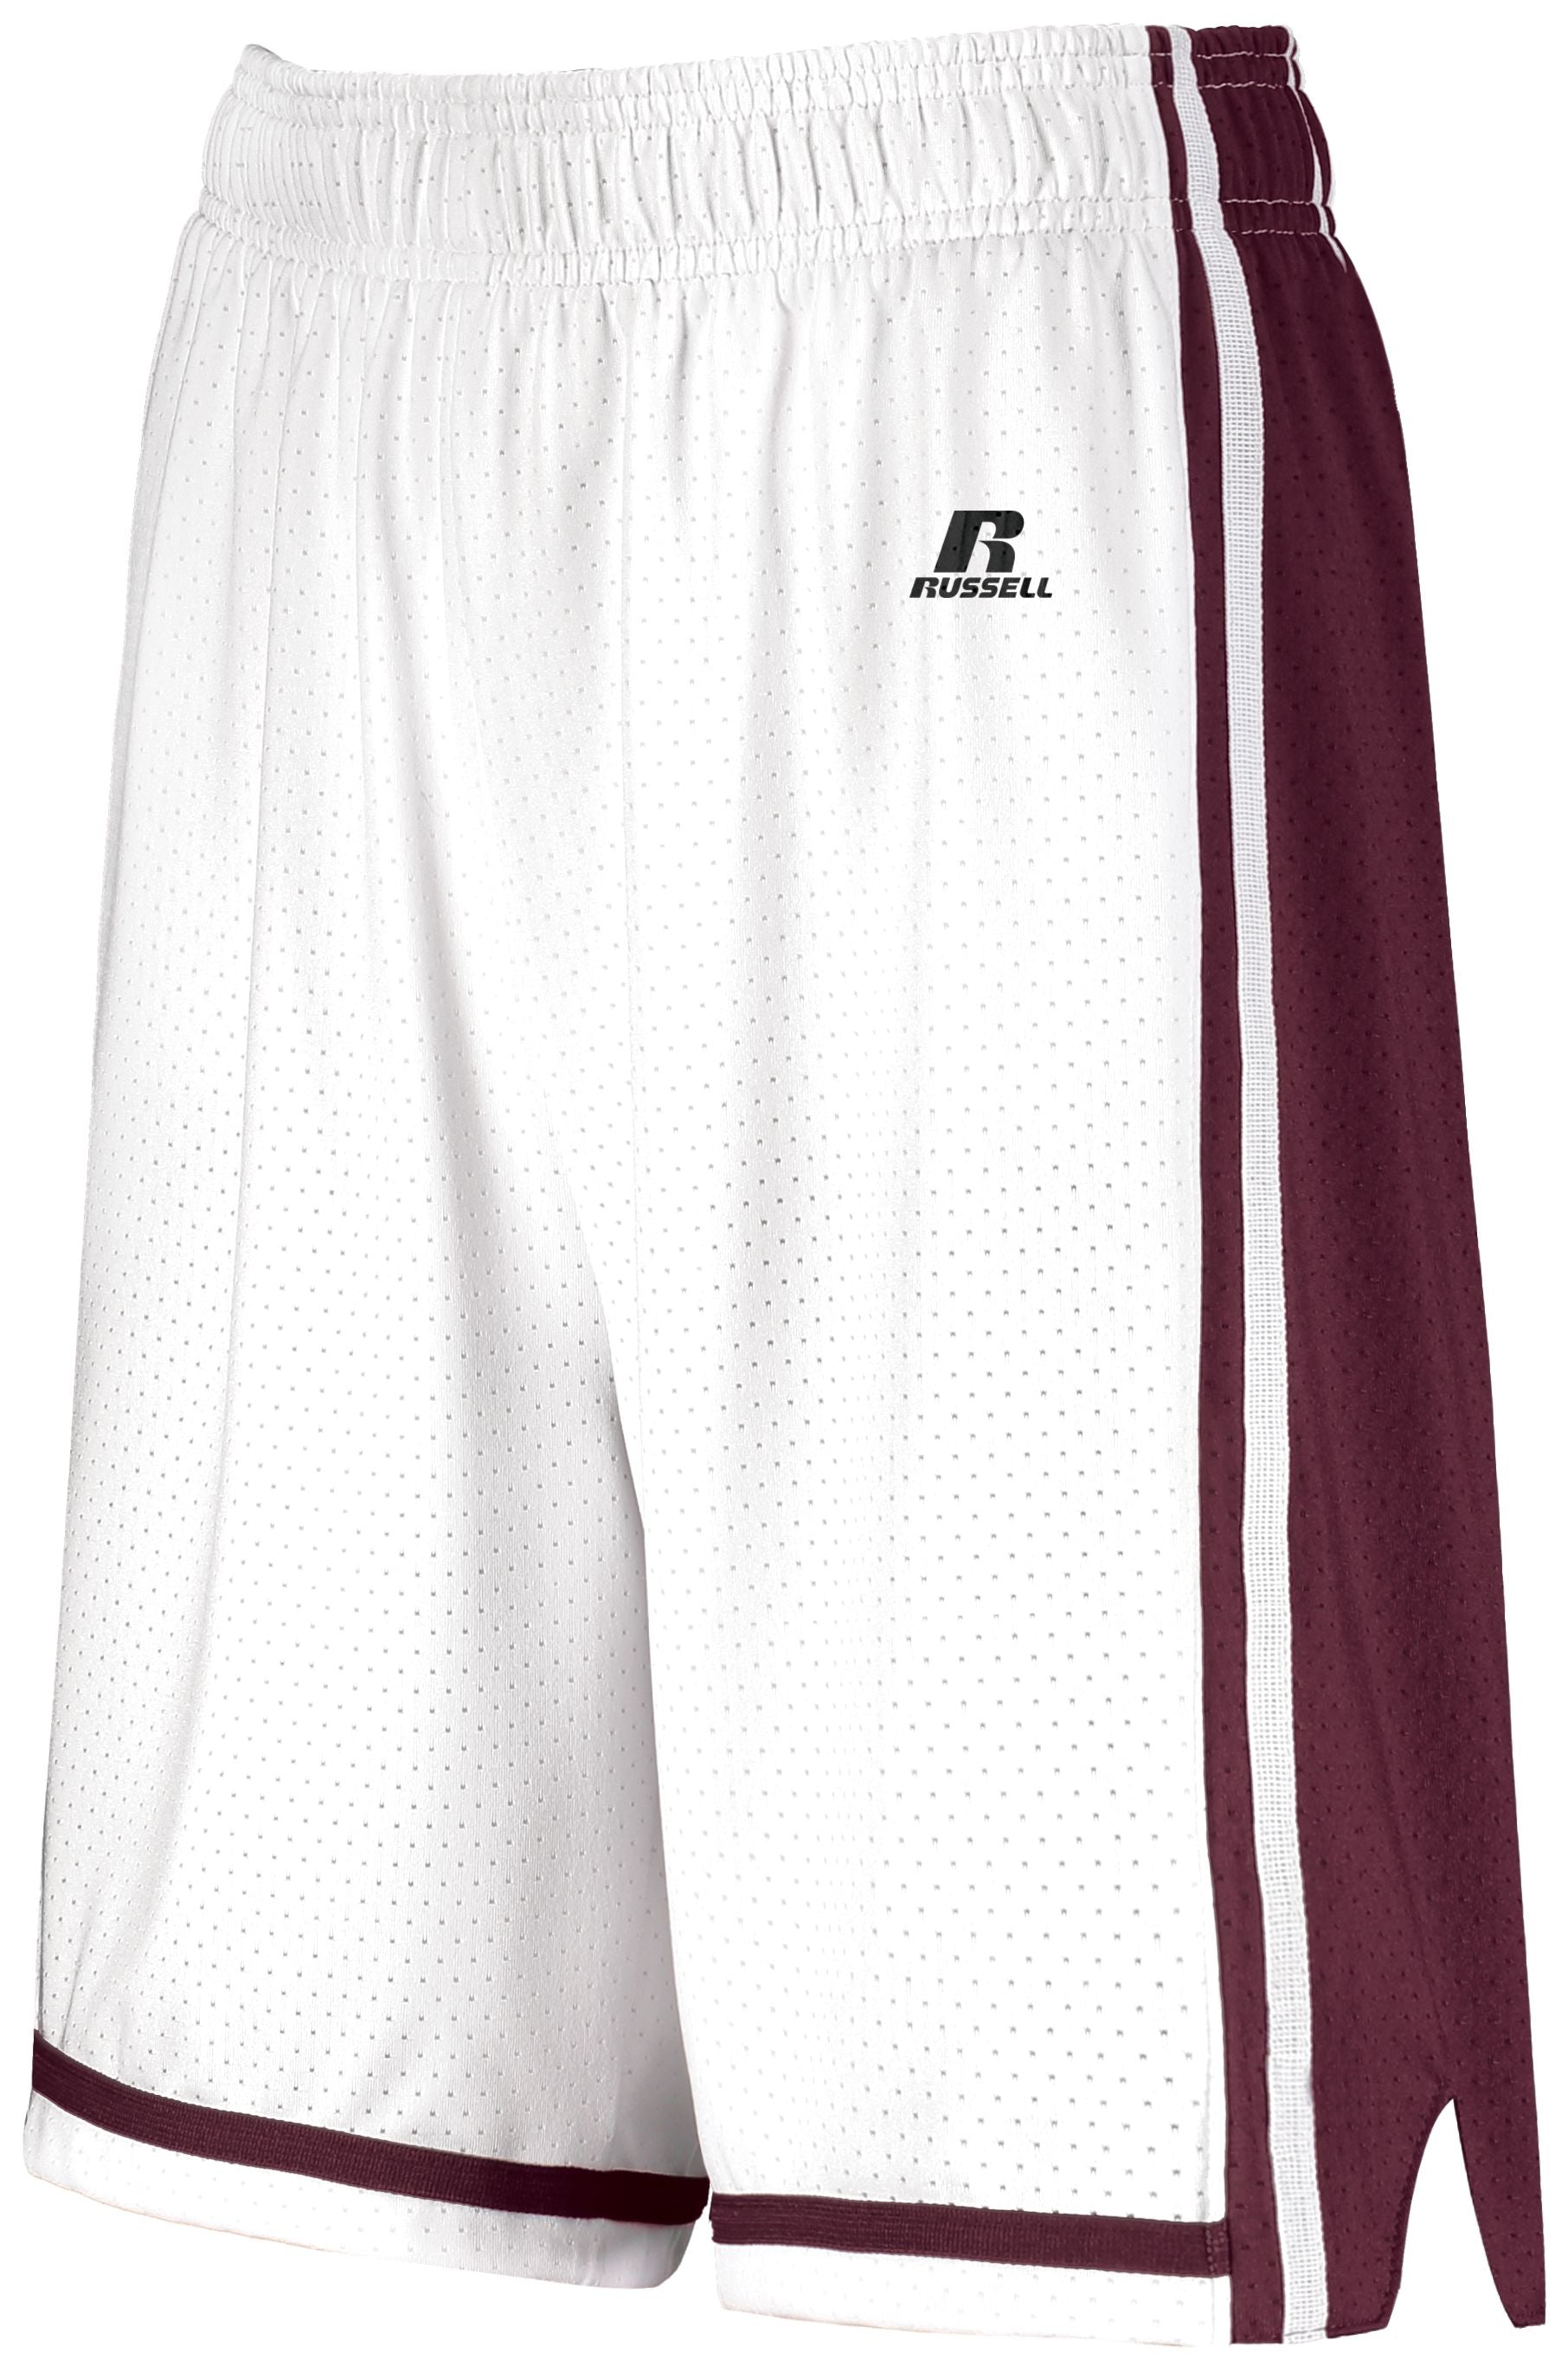 Russell Athletic Ladies Legacy Basketball Shorts in White/Maroon  -Part of the Ladies, Ladies-Shorts, Basketball, Russell-Athletic-Products, All-Sports, All-Sports-1 product lines at KanaleyCreations.com